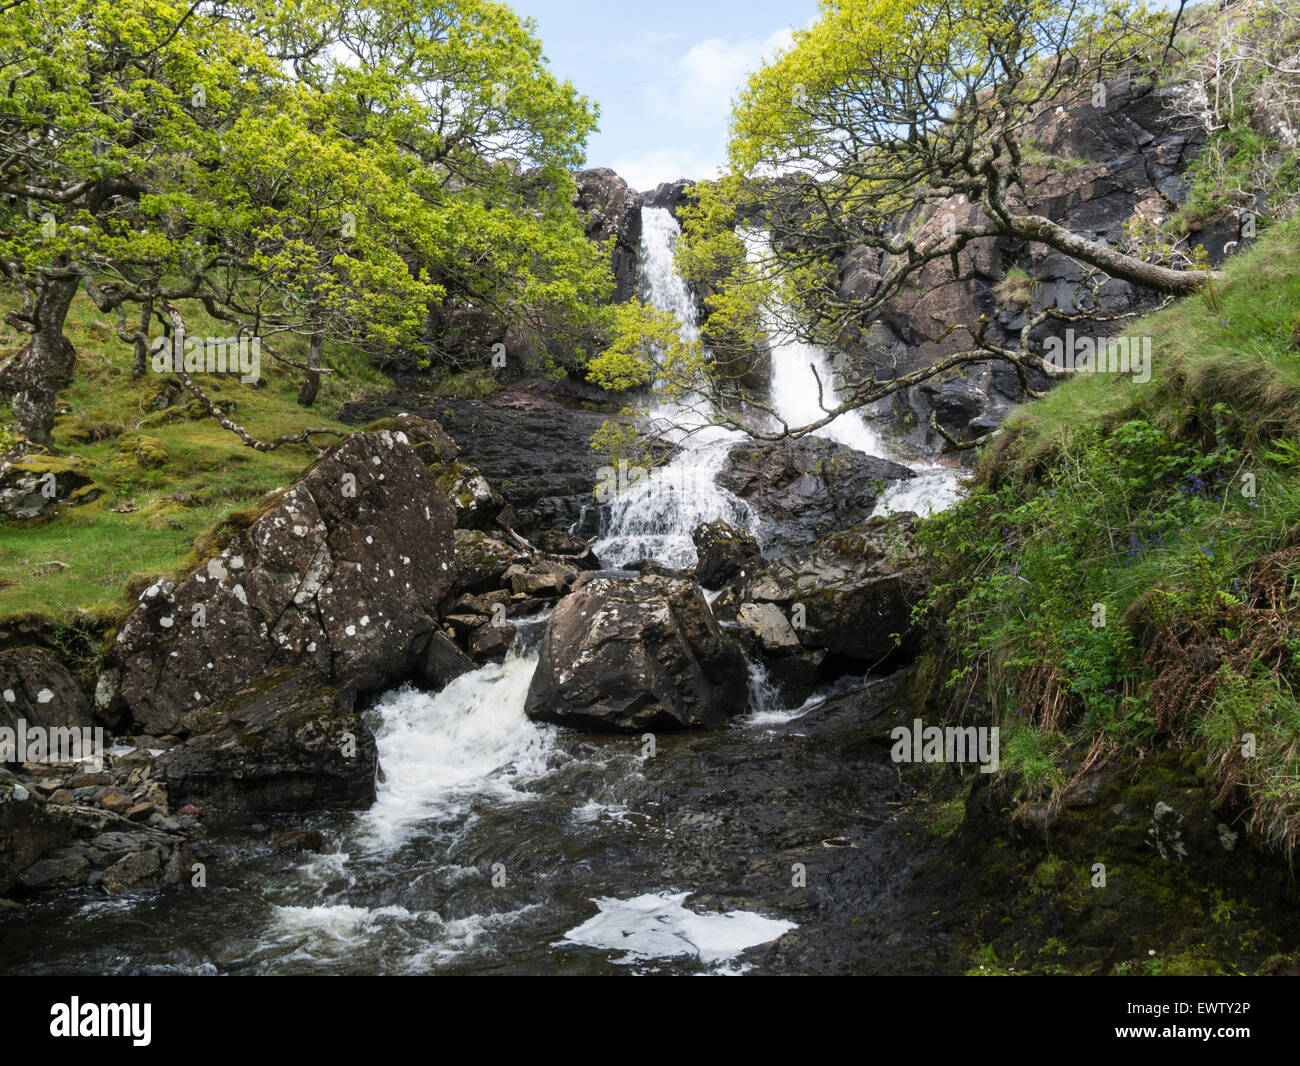 Eas Fors waterfall situated Allt an Eas Fors Burn Isle of Mull Argyll and Bute Scotland one of the most spectacular waterfalls on Mull Stock Photo